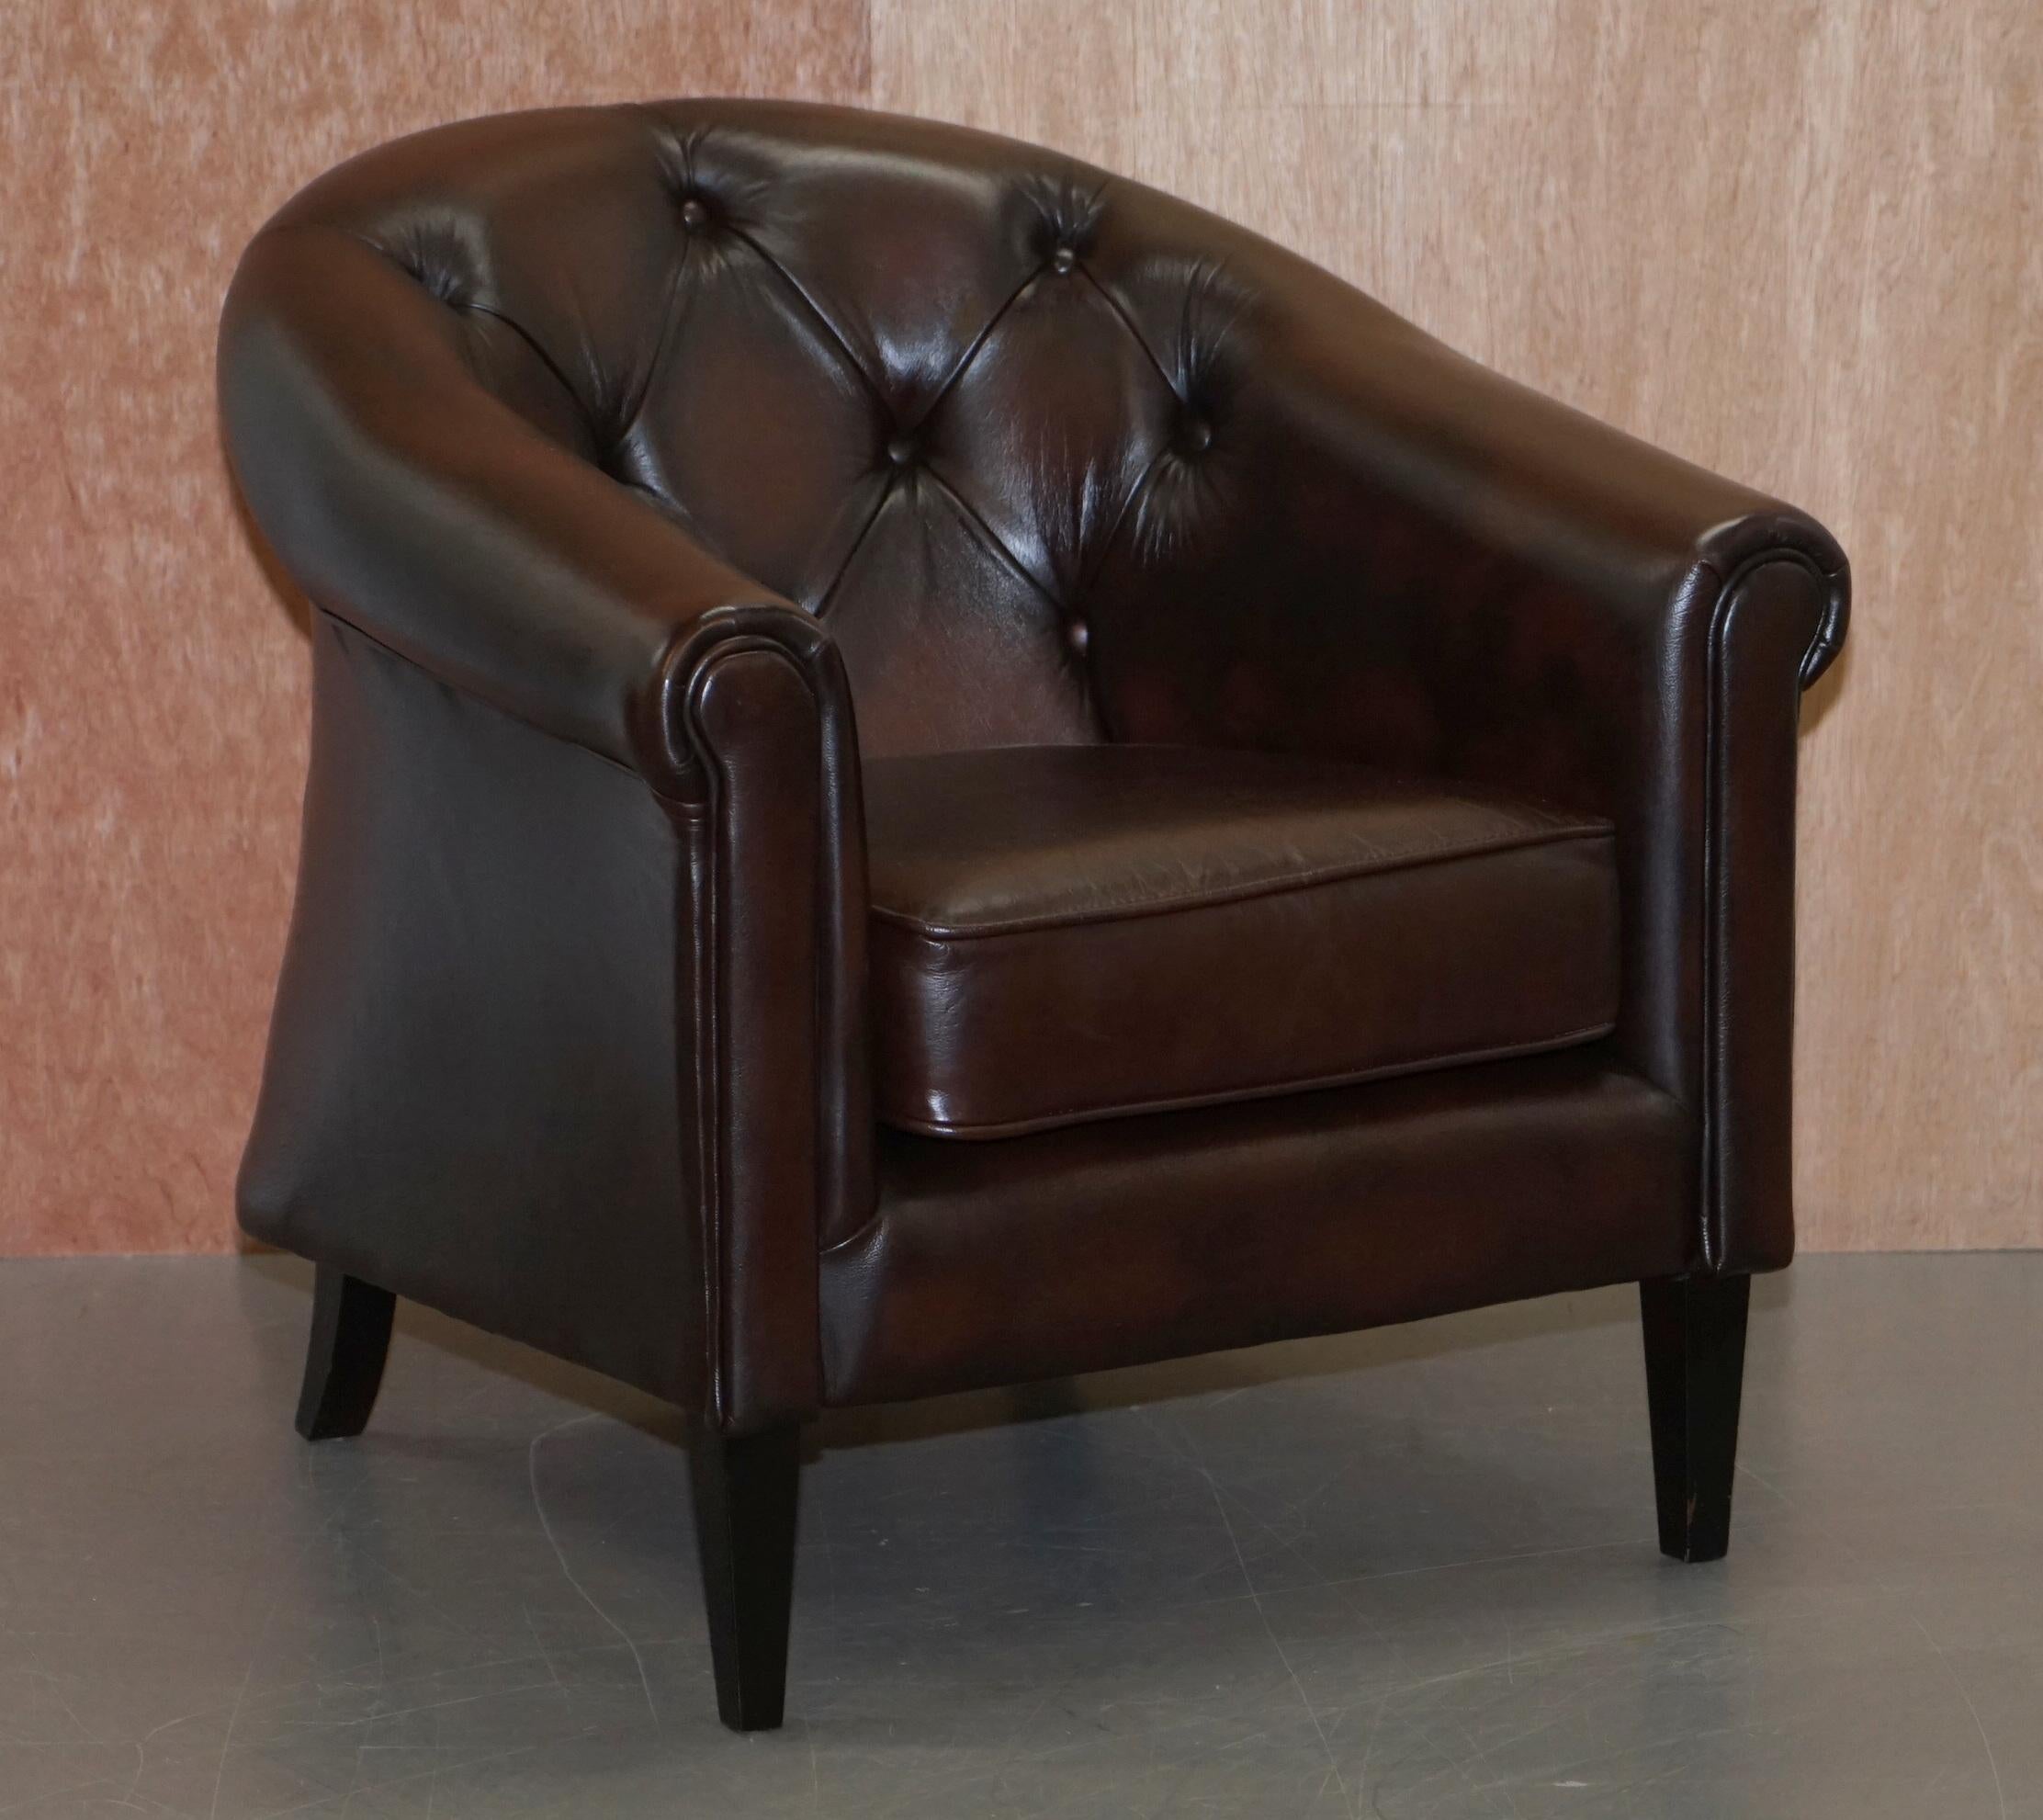 We are delighted to this stunning pair of Thomas Lloyd Winchester brown leather club armchairs with Chesterfield buttoning

A nice and comfortable pair of lounge reading armchairs, they seat well and are quite a neutral design so seem to fit